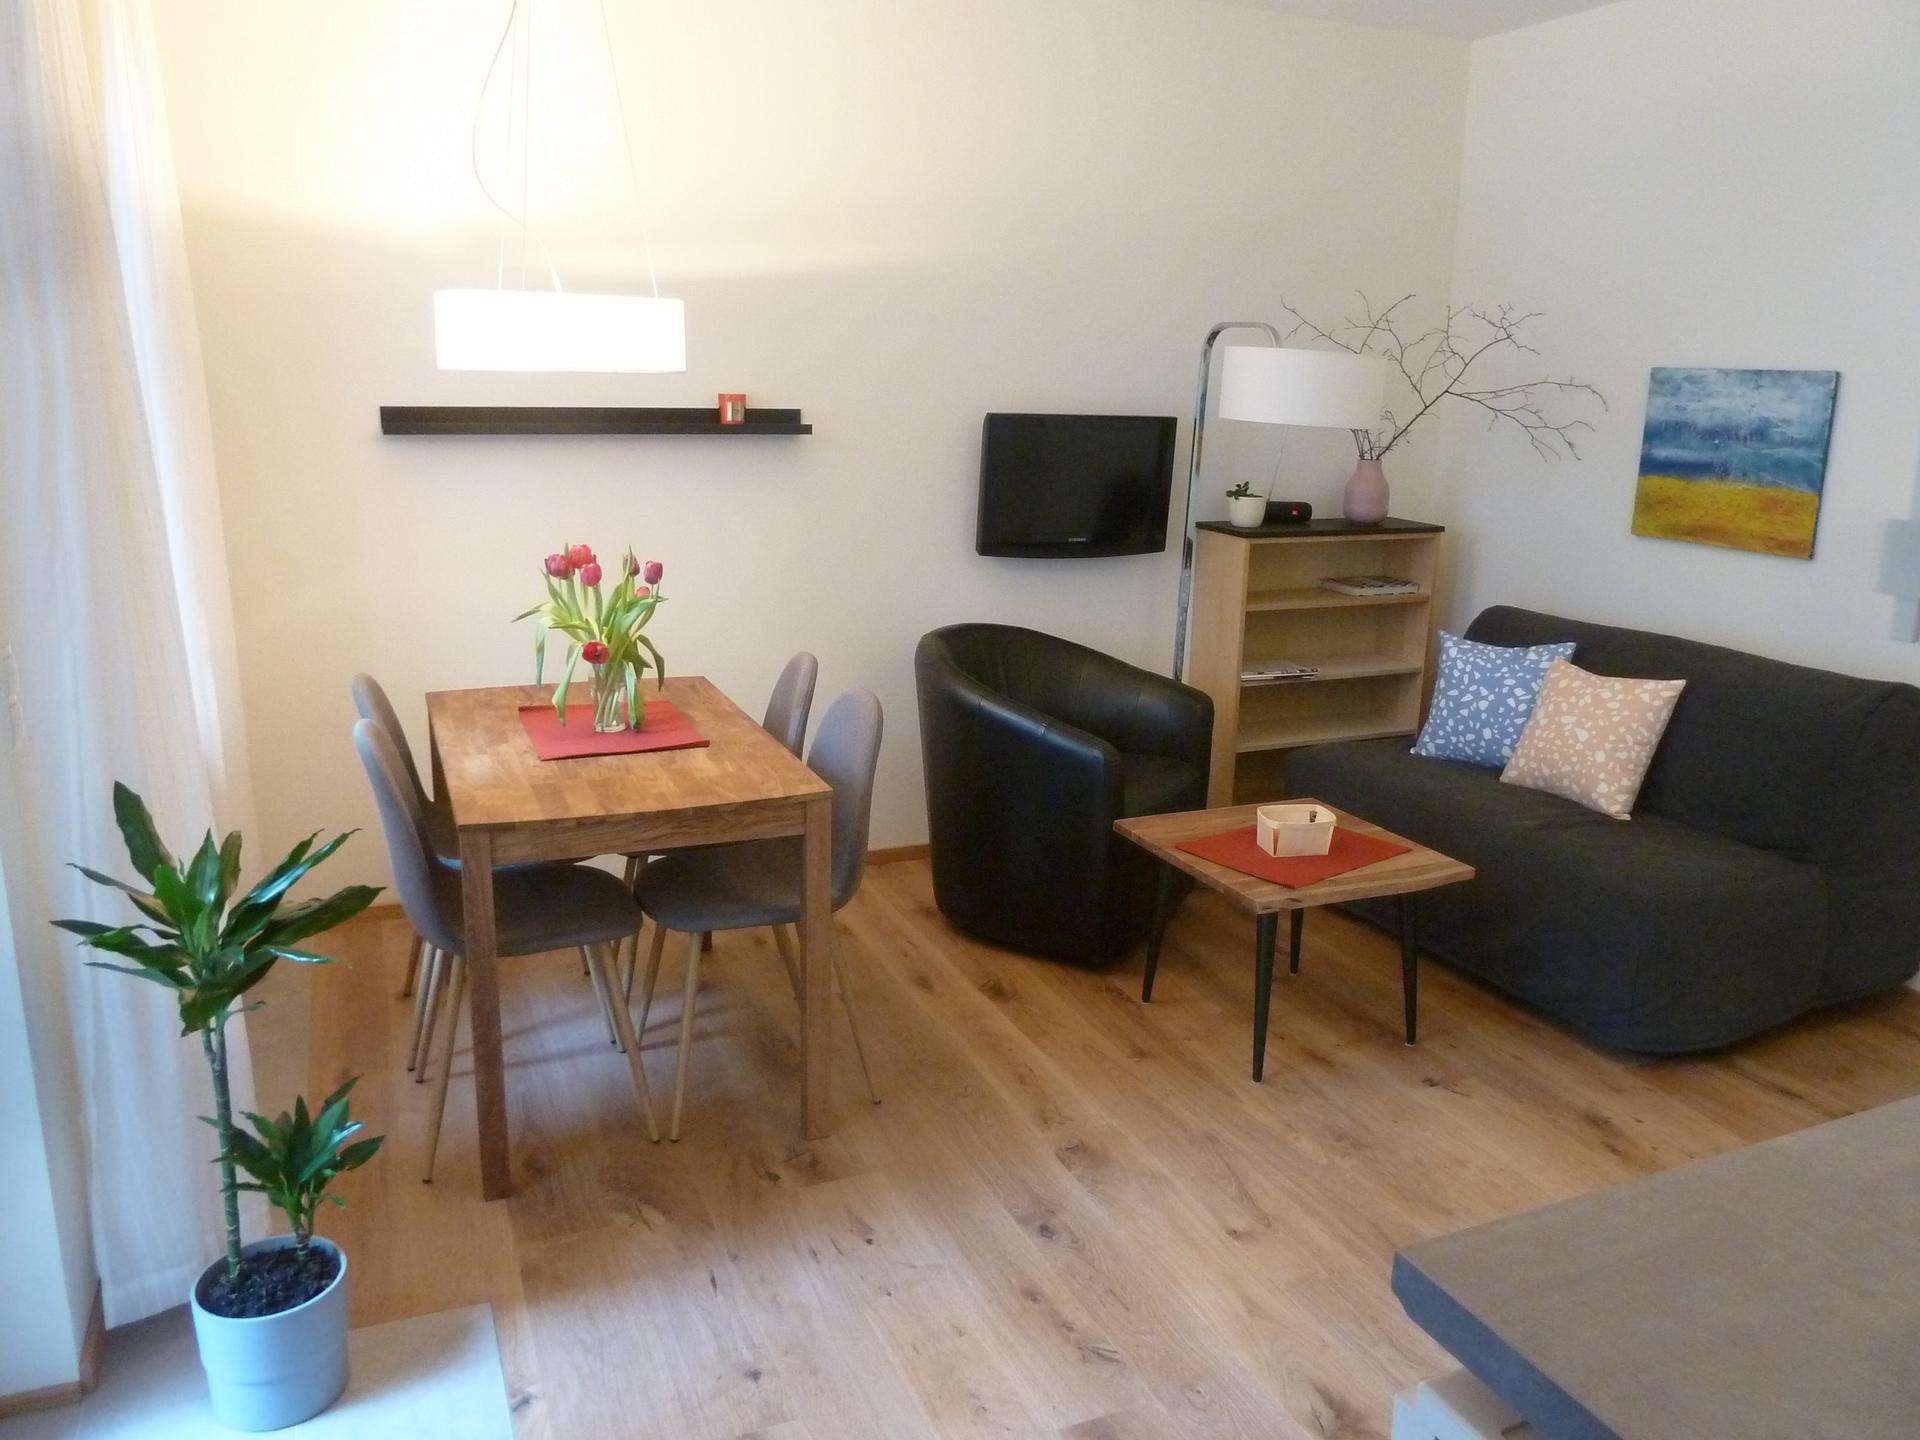 fully furnished and equipped (all bedding, towels etc urban but quiet apartment for 2 with small, fenced garden